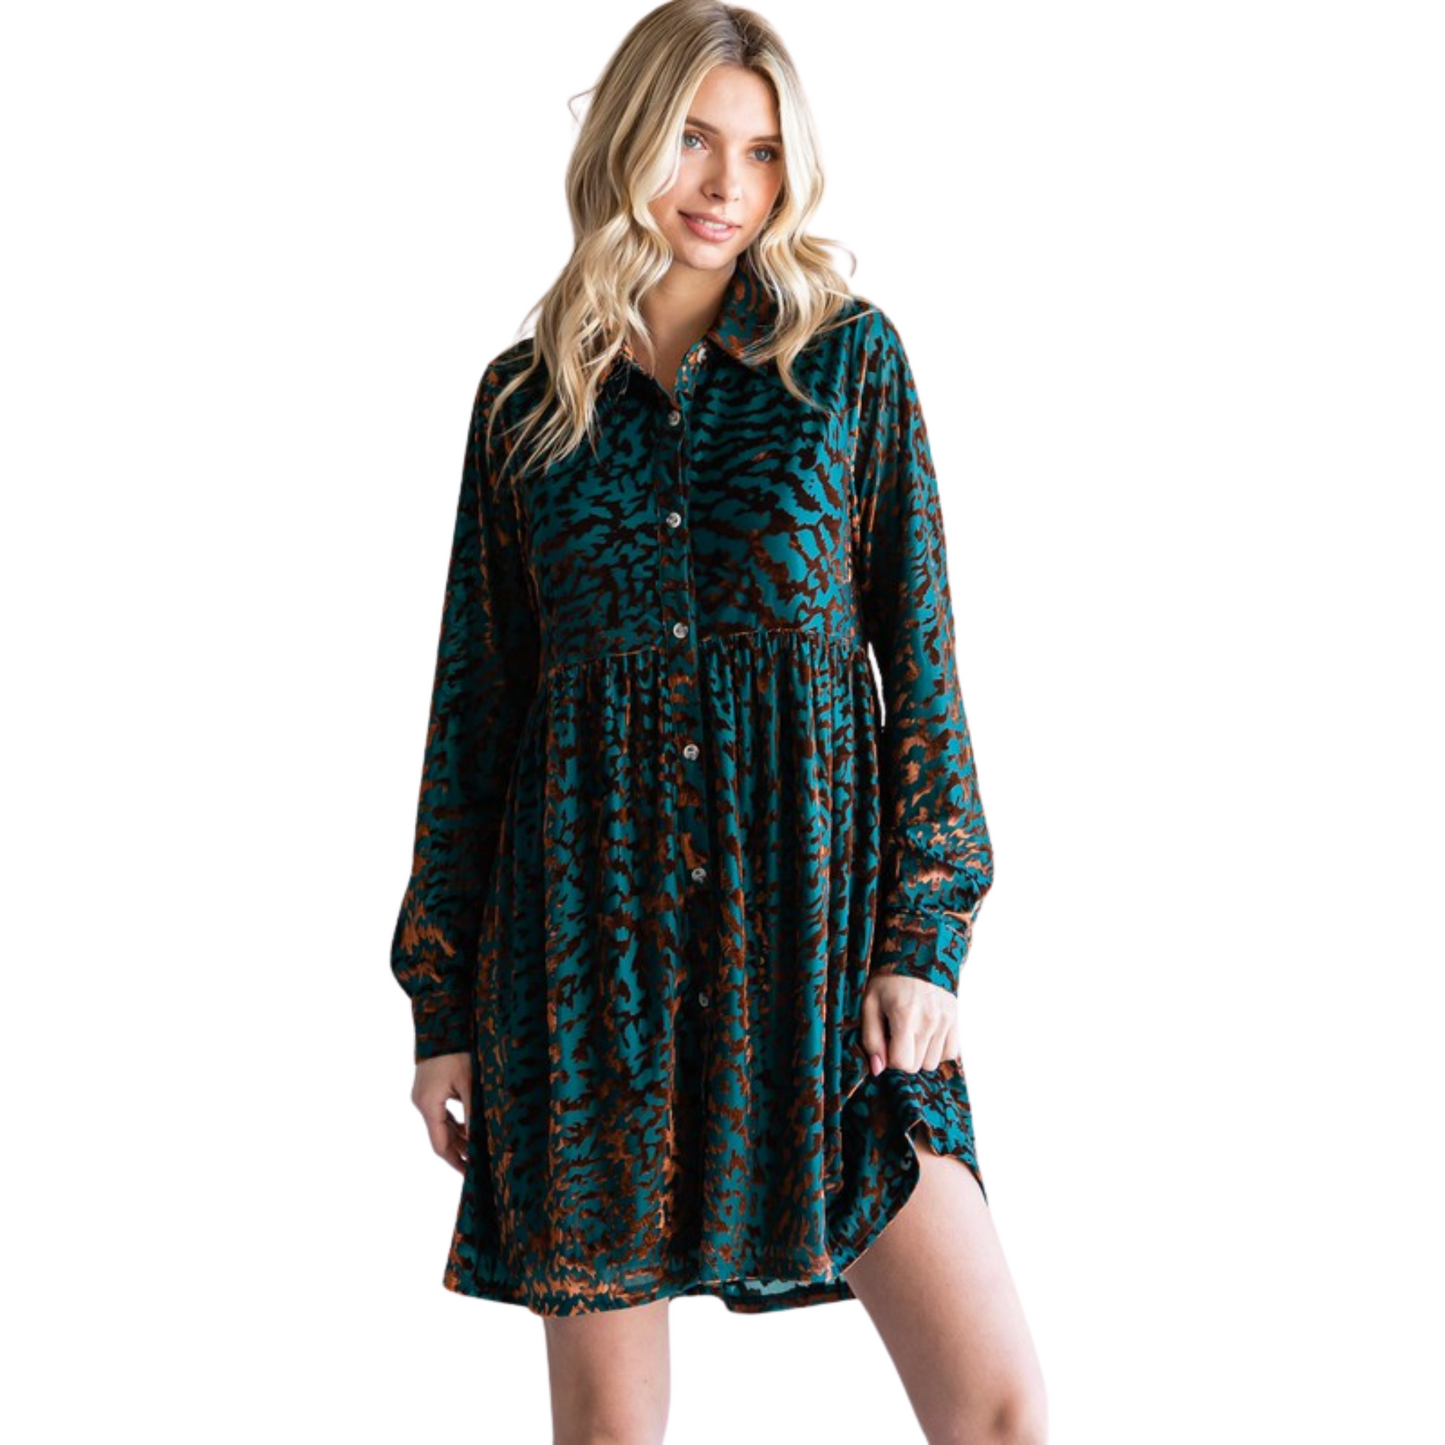 Introducing the Velvet Leopard Babydoll Dress: a stylish combination of a collared neckline, long sleeves, and a bold leopard print. Made from lightweight velvet, this plus size dress is un-lined and non-sheer, perfect for styling up any look. Available in teal.